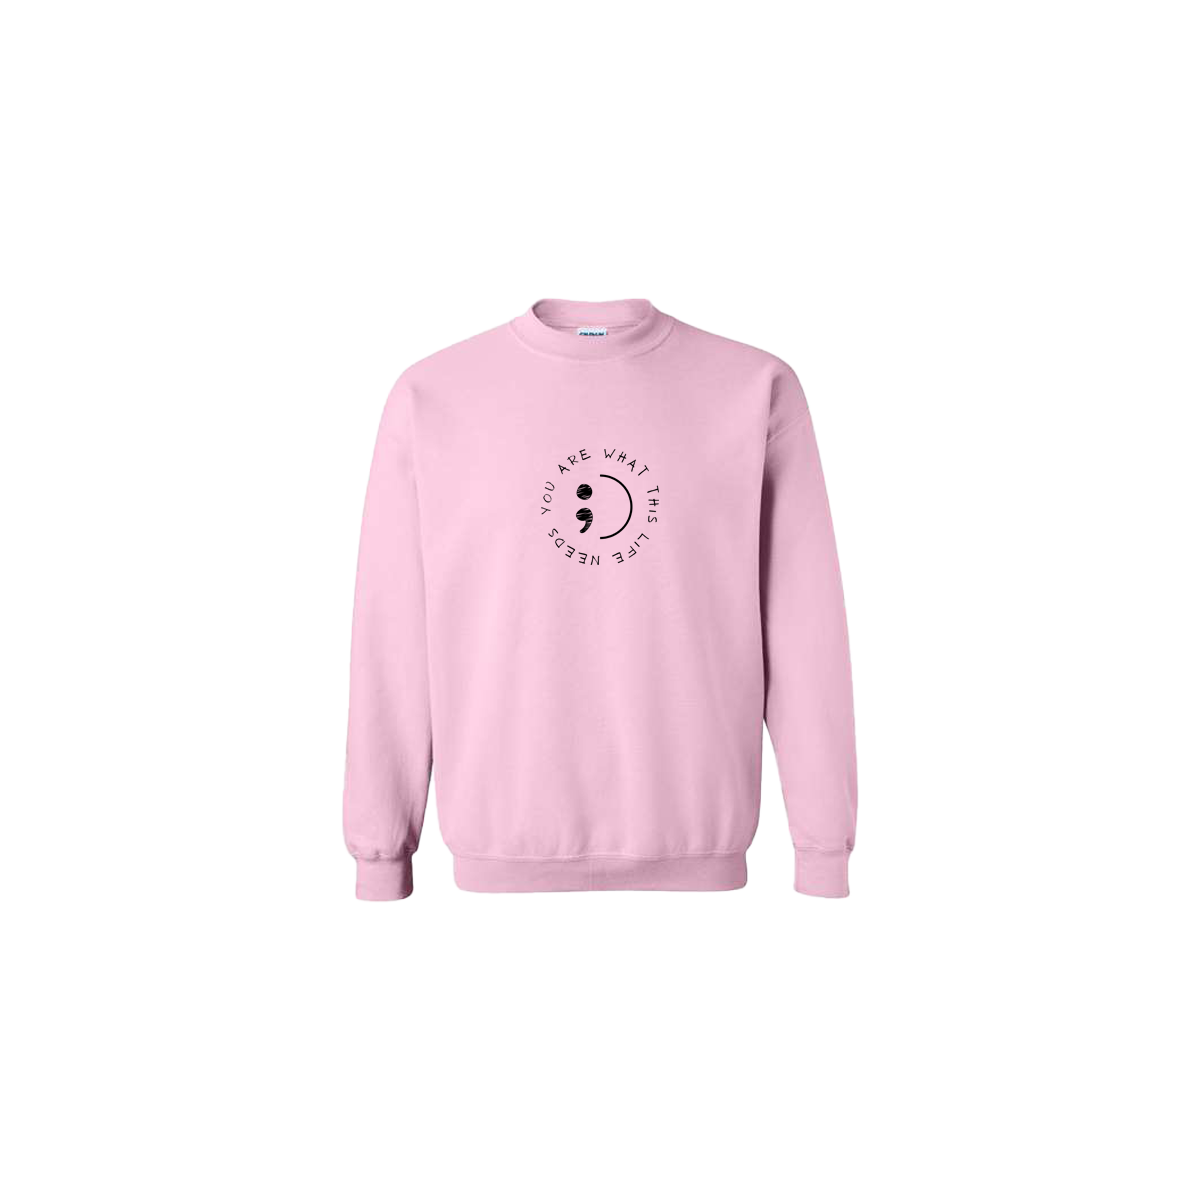 You Are What This Life Needs Embroidered Light Pink Crewneck - Mental Health Awareness Clothing